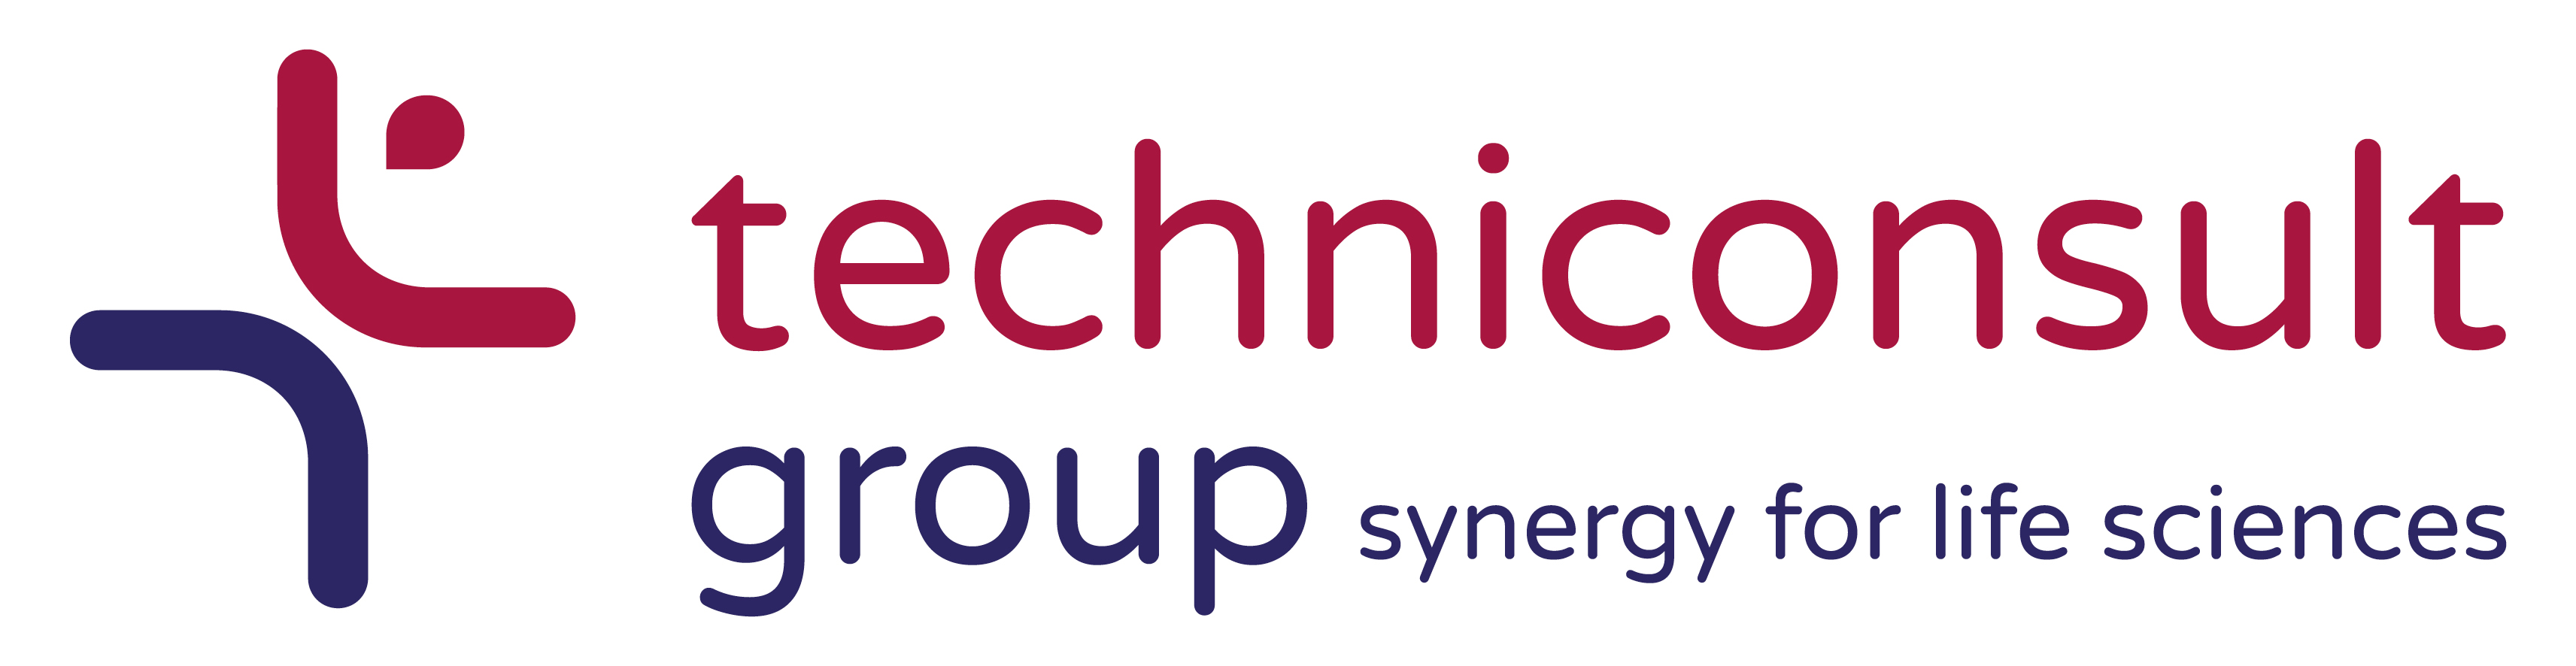 Techniconsult Group